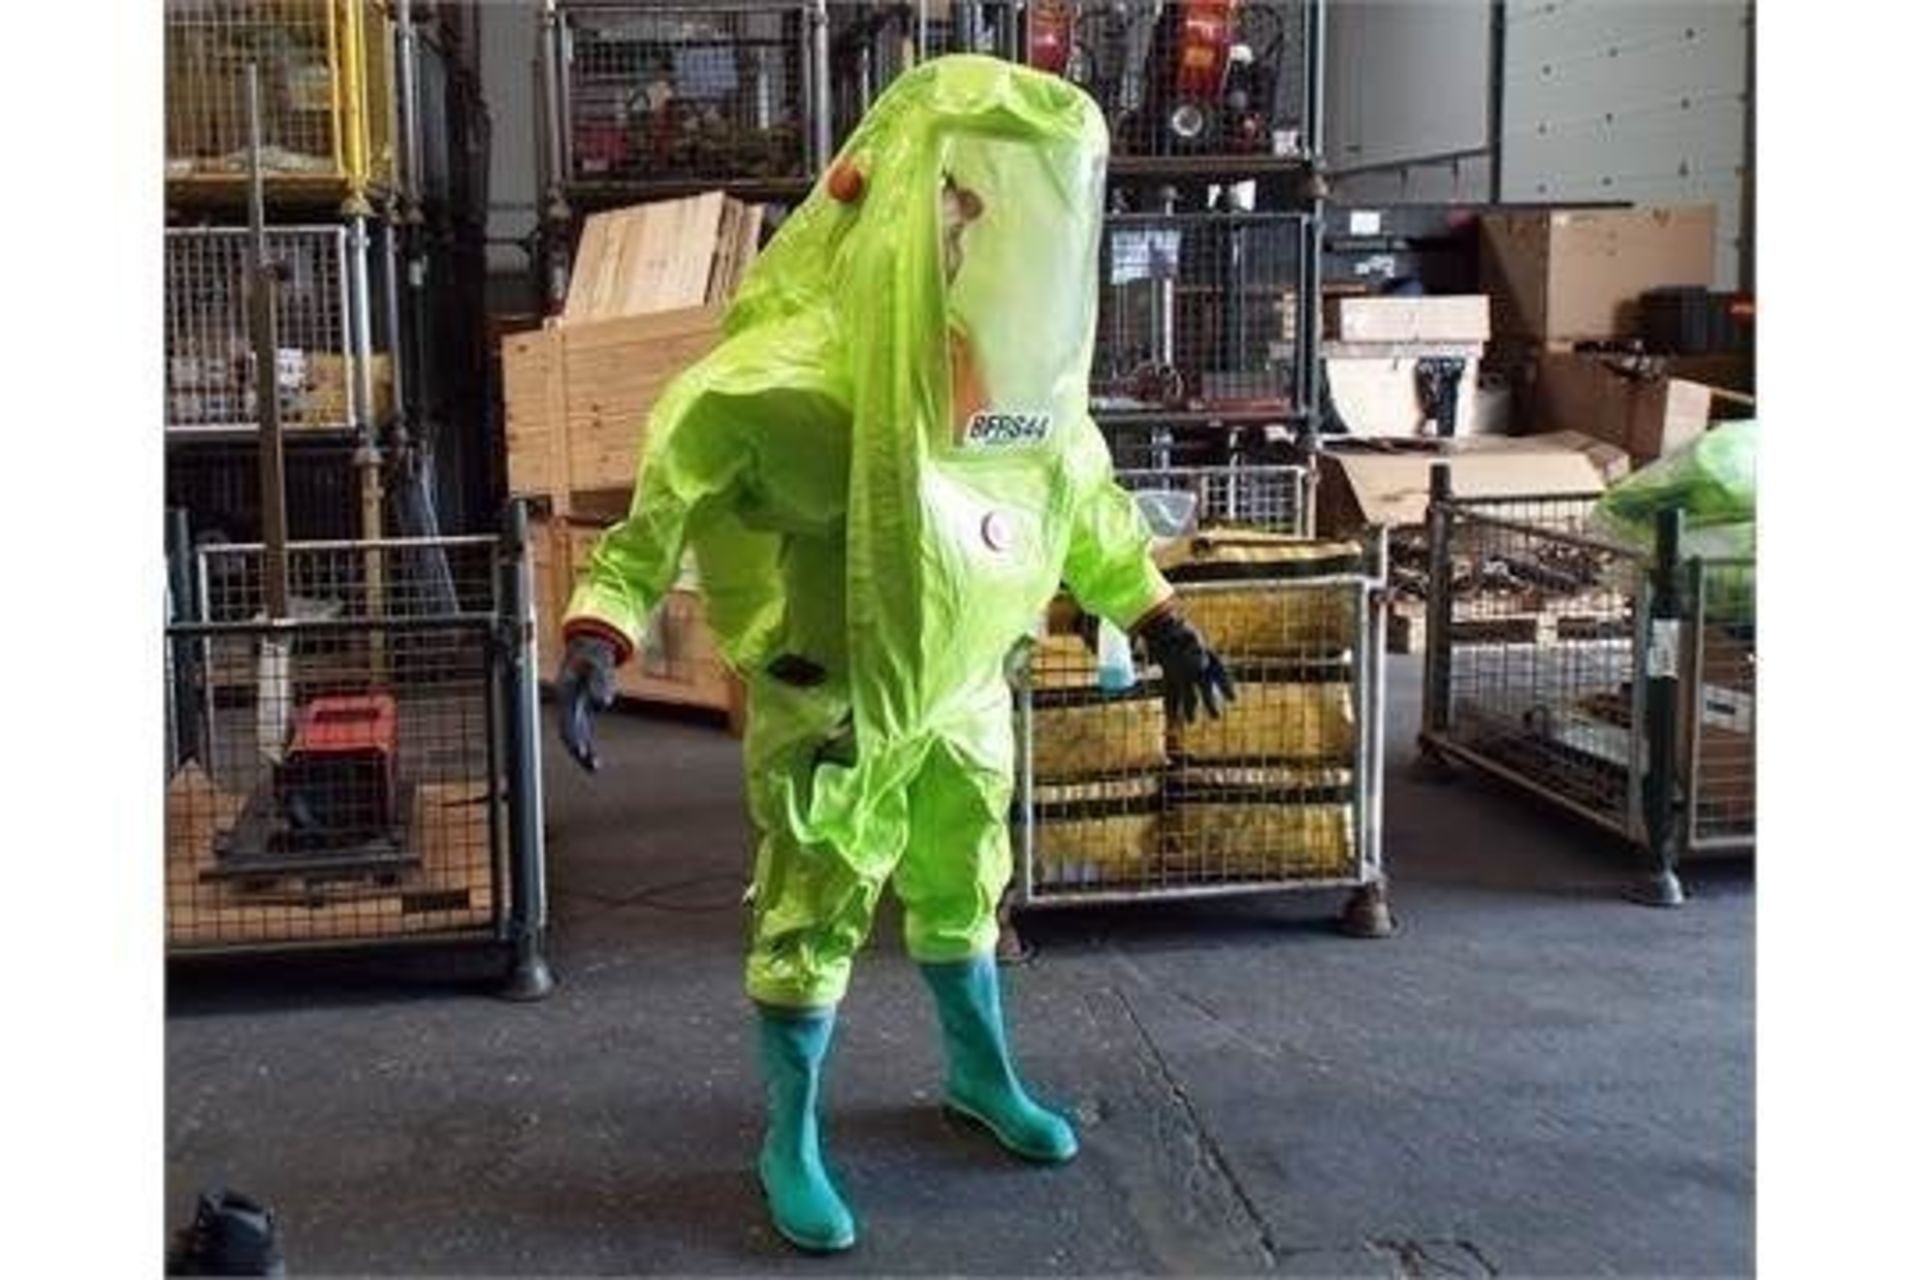 10x UNISSUED RESPIREX TYCHEM TK GAS-TIGHT HAZMAT SUIT TYPE 1A WITH ATTACHED BOOTS AND GLOVES - Image 3 of 11